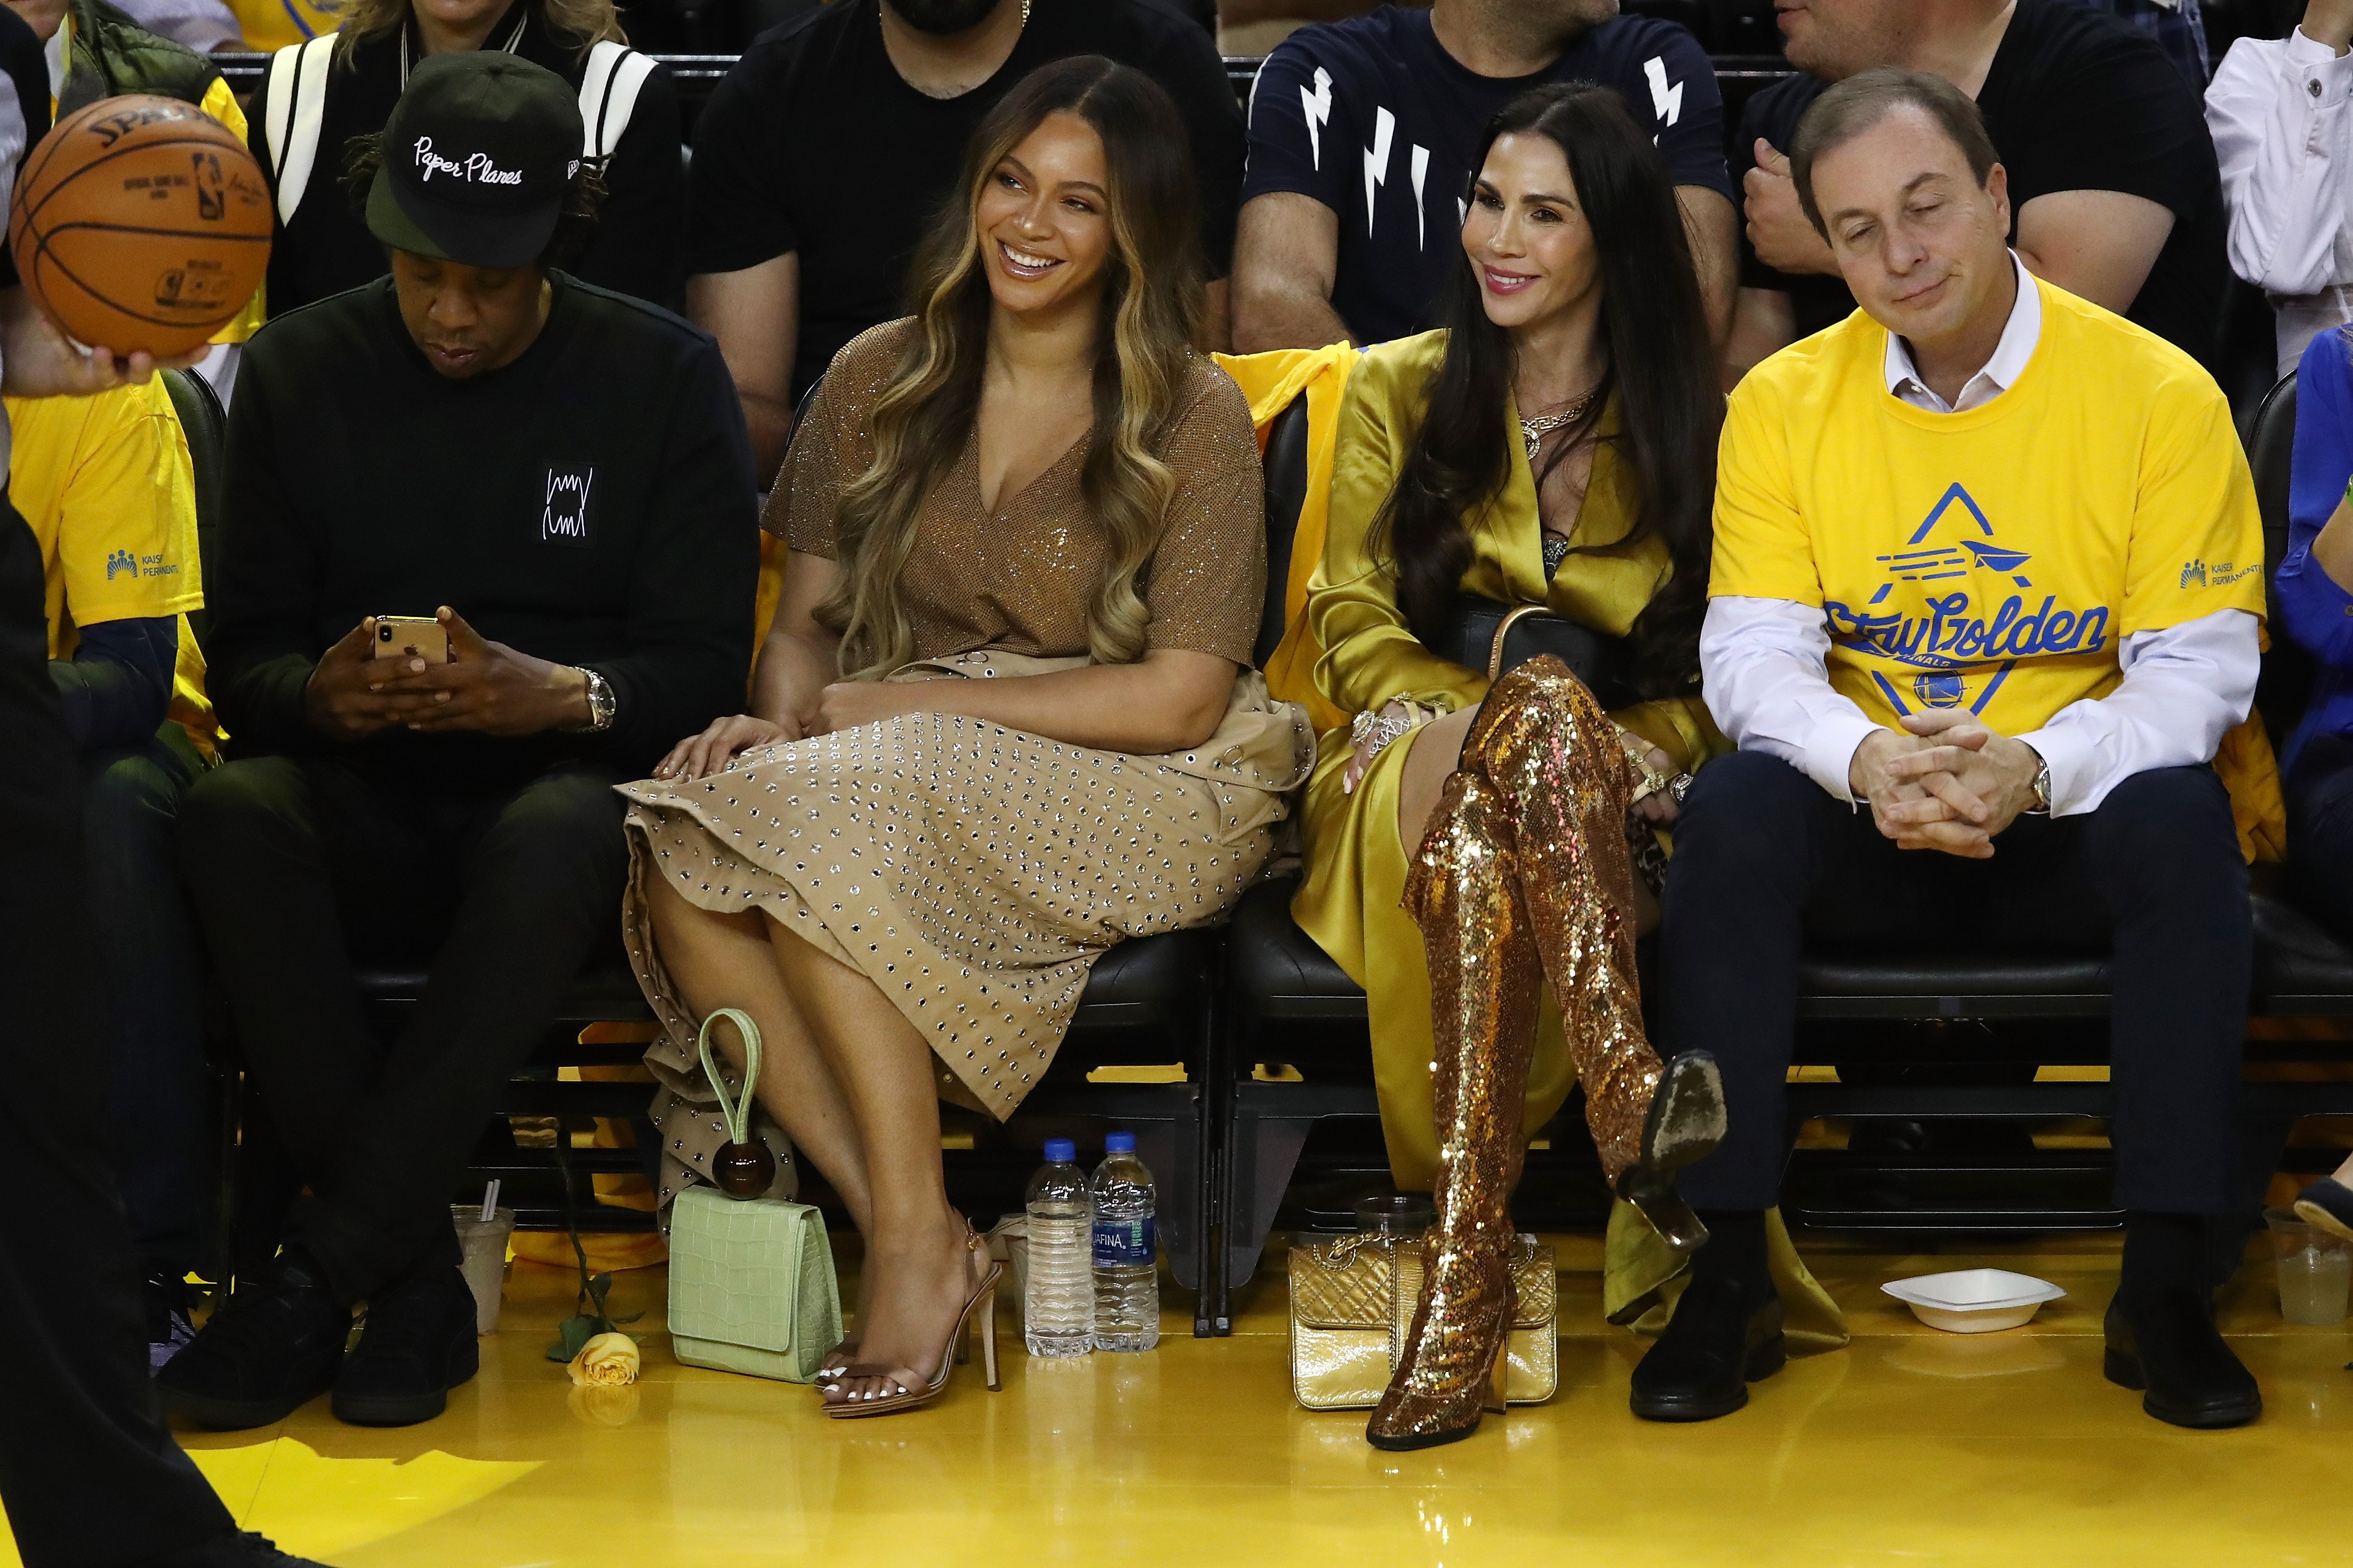 Jay-Z, Beyonce, Nicole Curran & Joseph Lacob at Game Three of the 2019 NBA Finals between the Golden State Warriors and the Toronto Raptors on June 05, 2019 in Oakland, California. | Photo: Getty Images